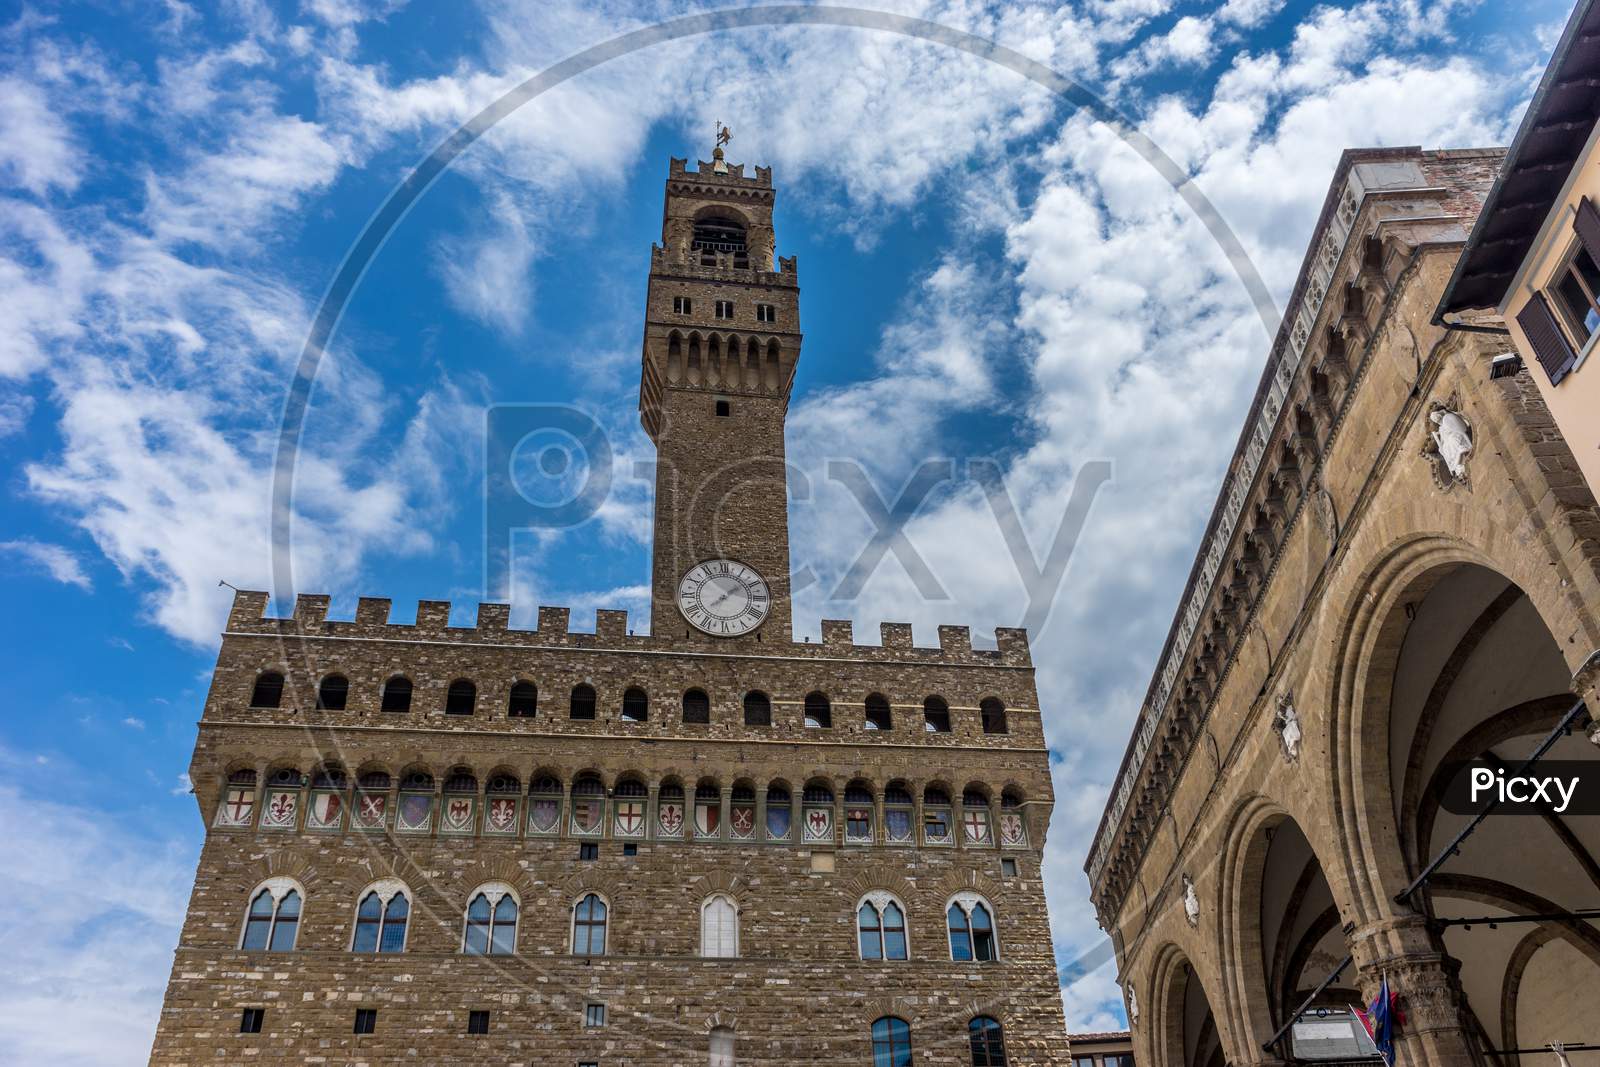 Italy,Florence, Palazzo Vecchio, A Large Tall Tower With A Clock On The Side Of Palazzo Vecchio